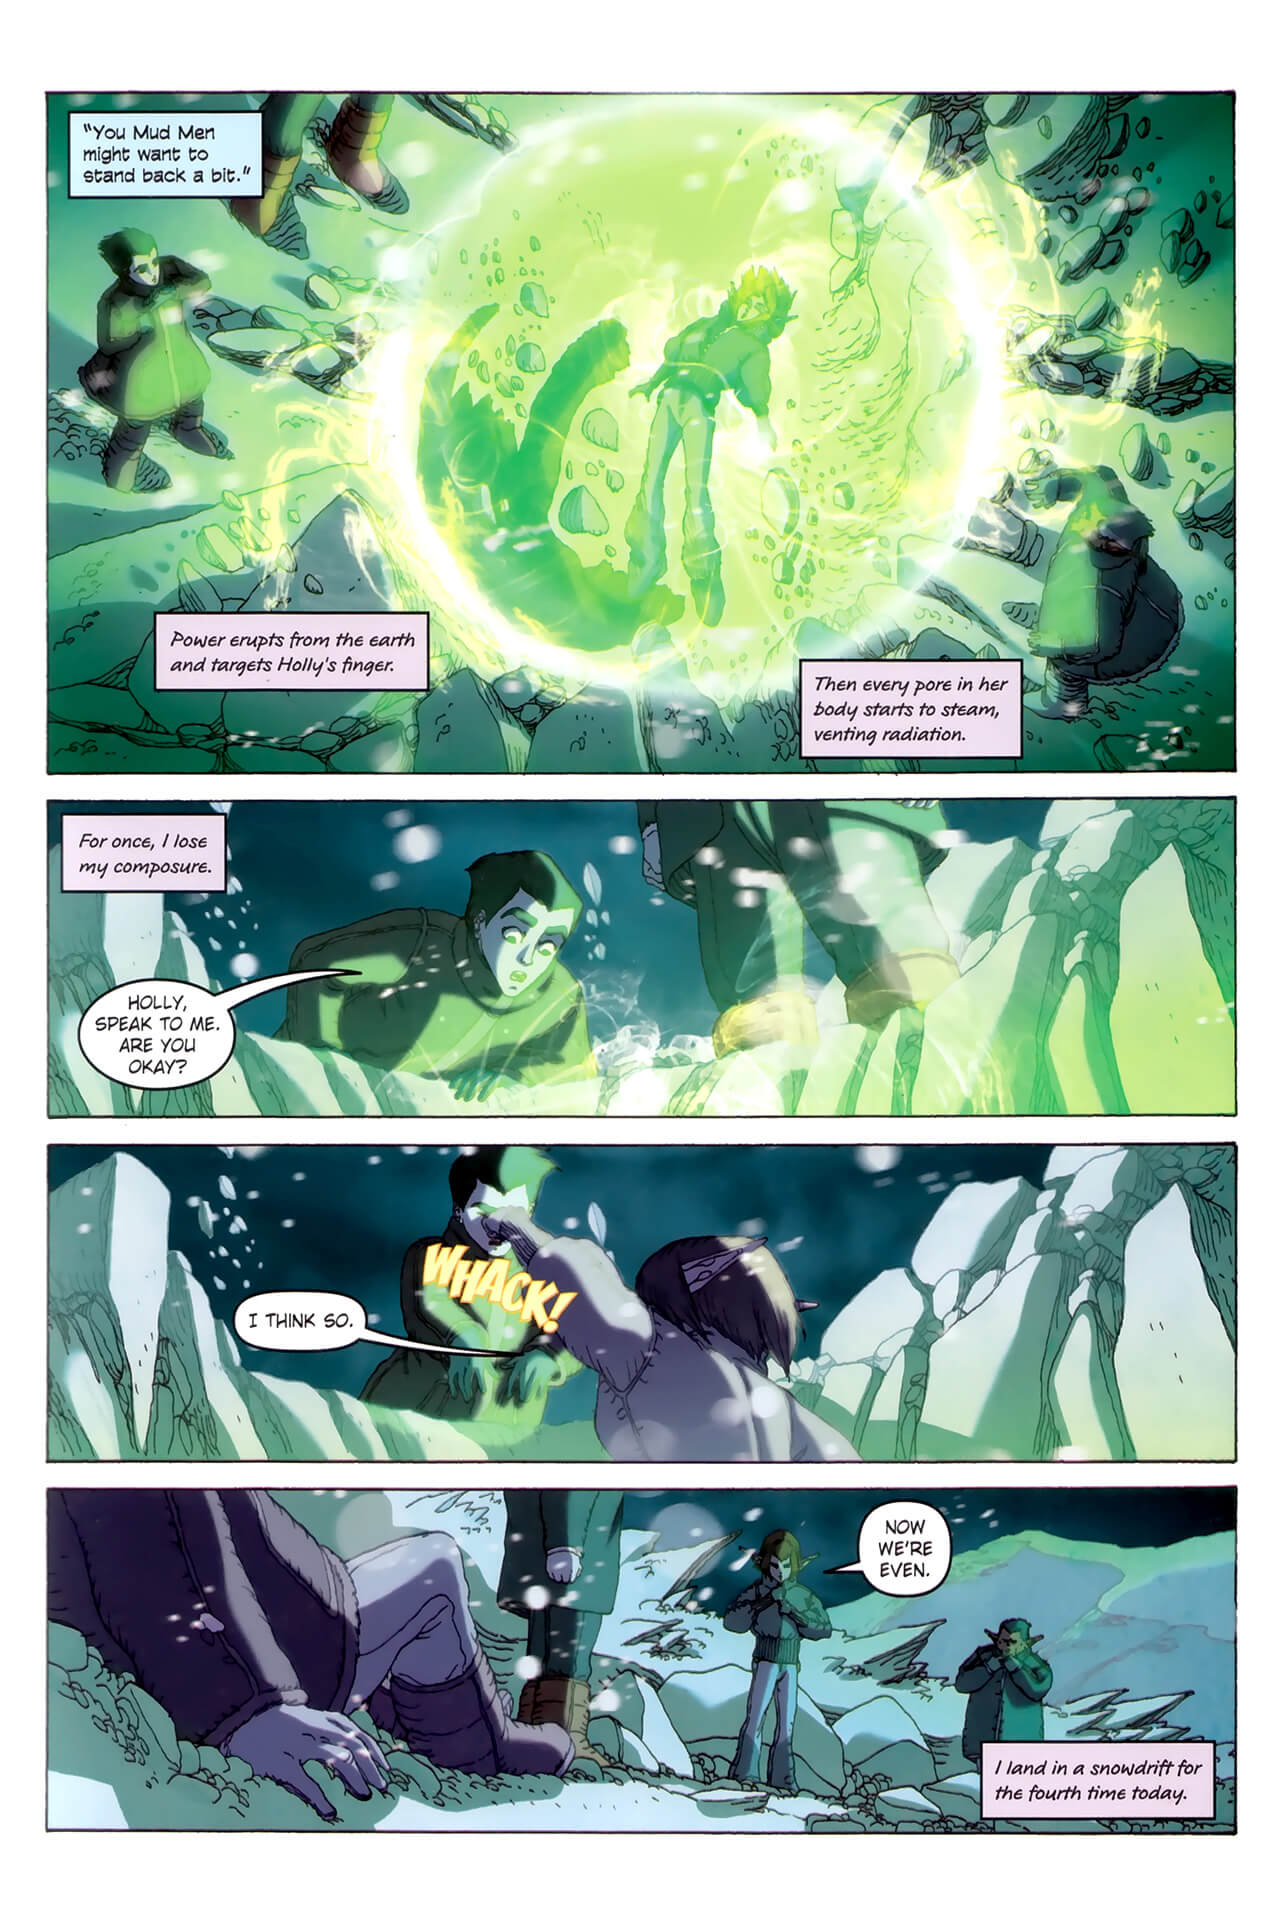 page 71 of artemis fowl the arctic incident graphic novel